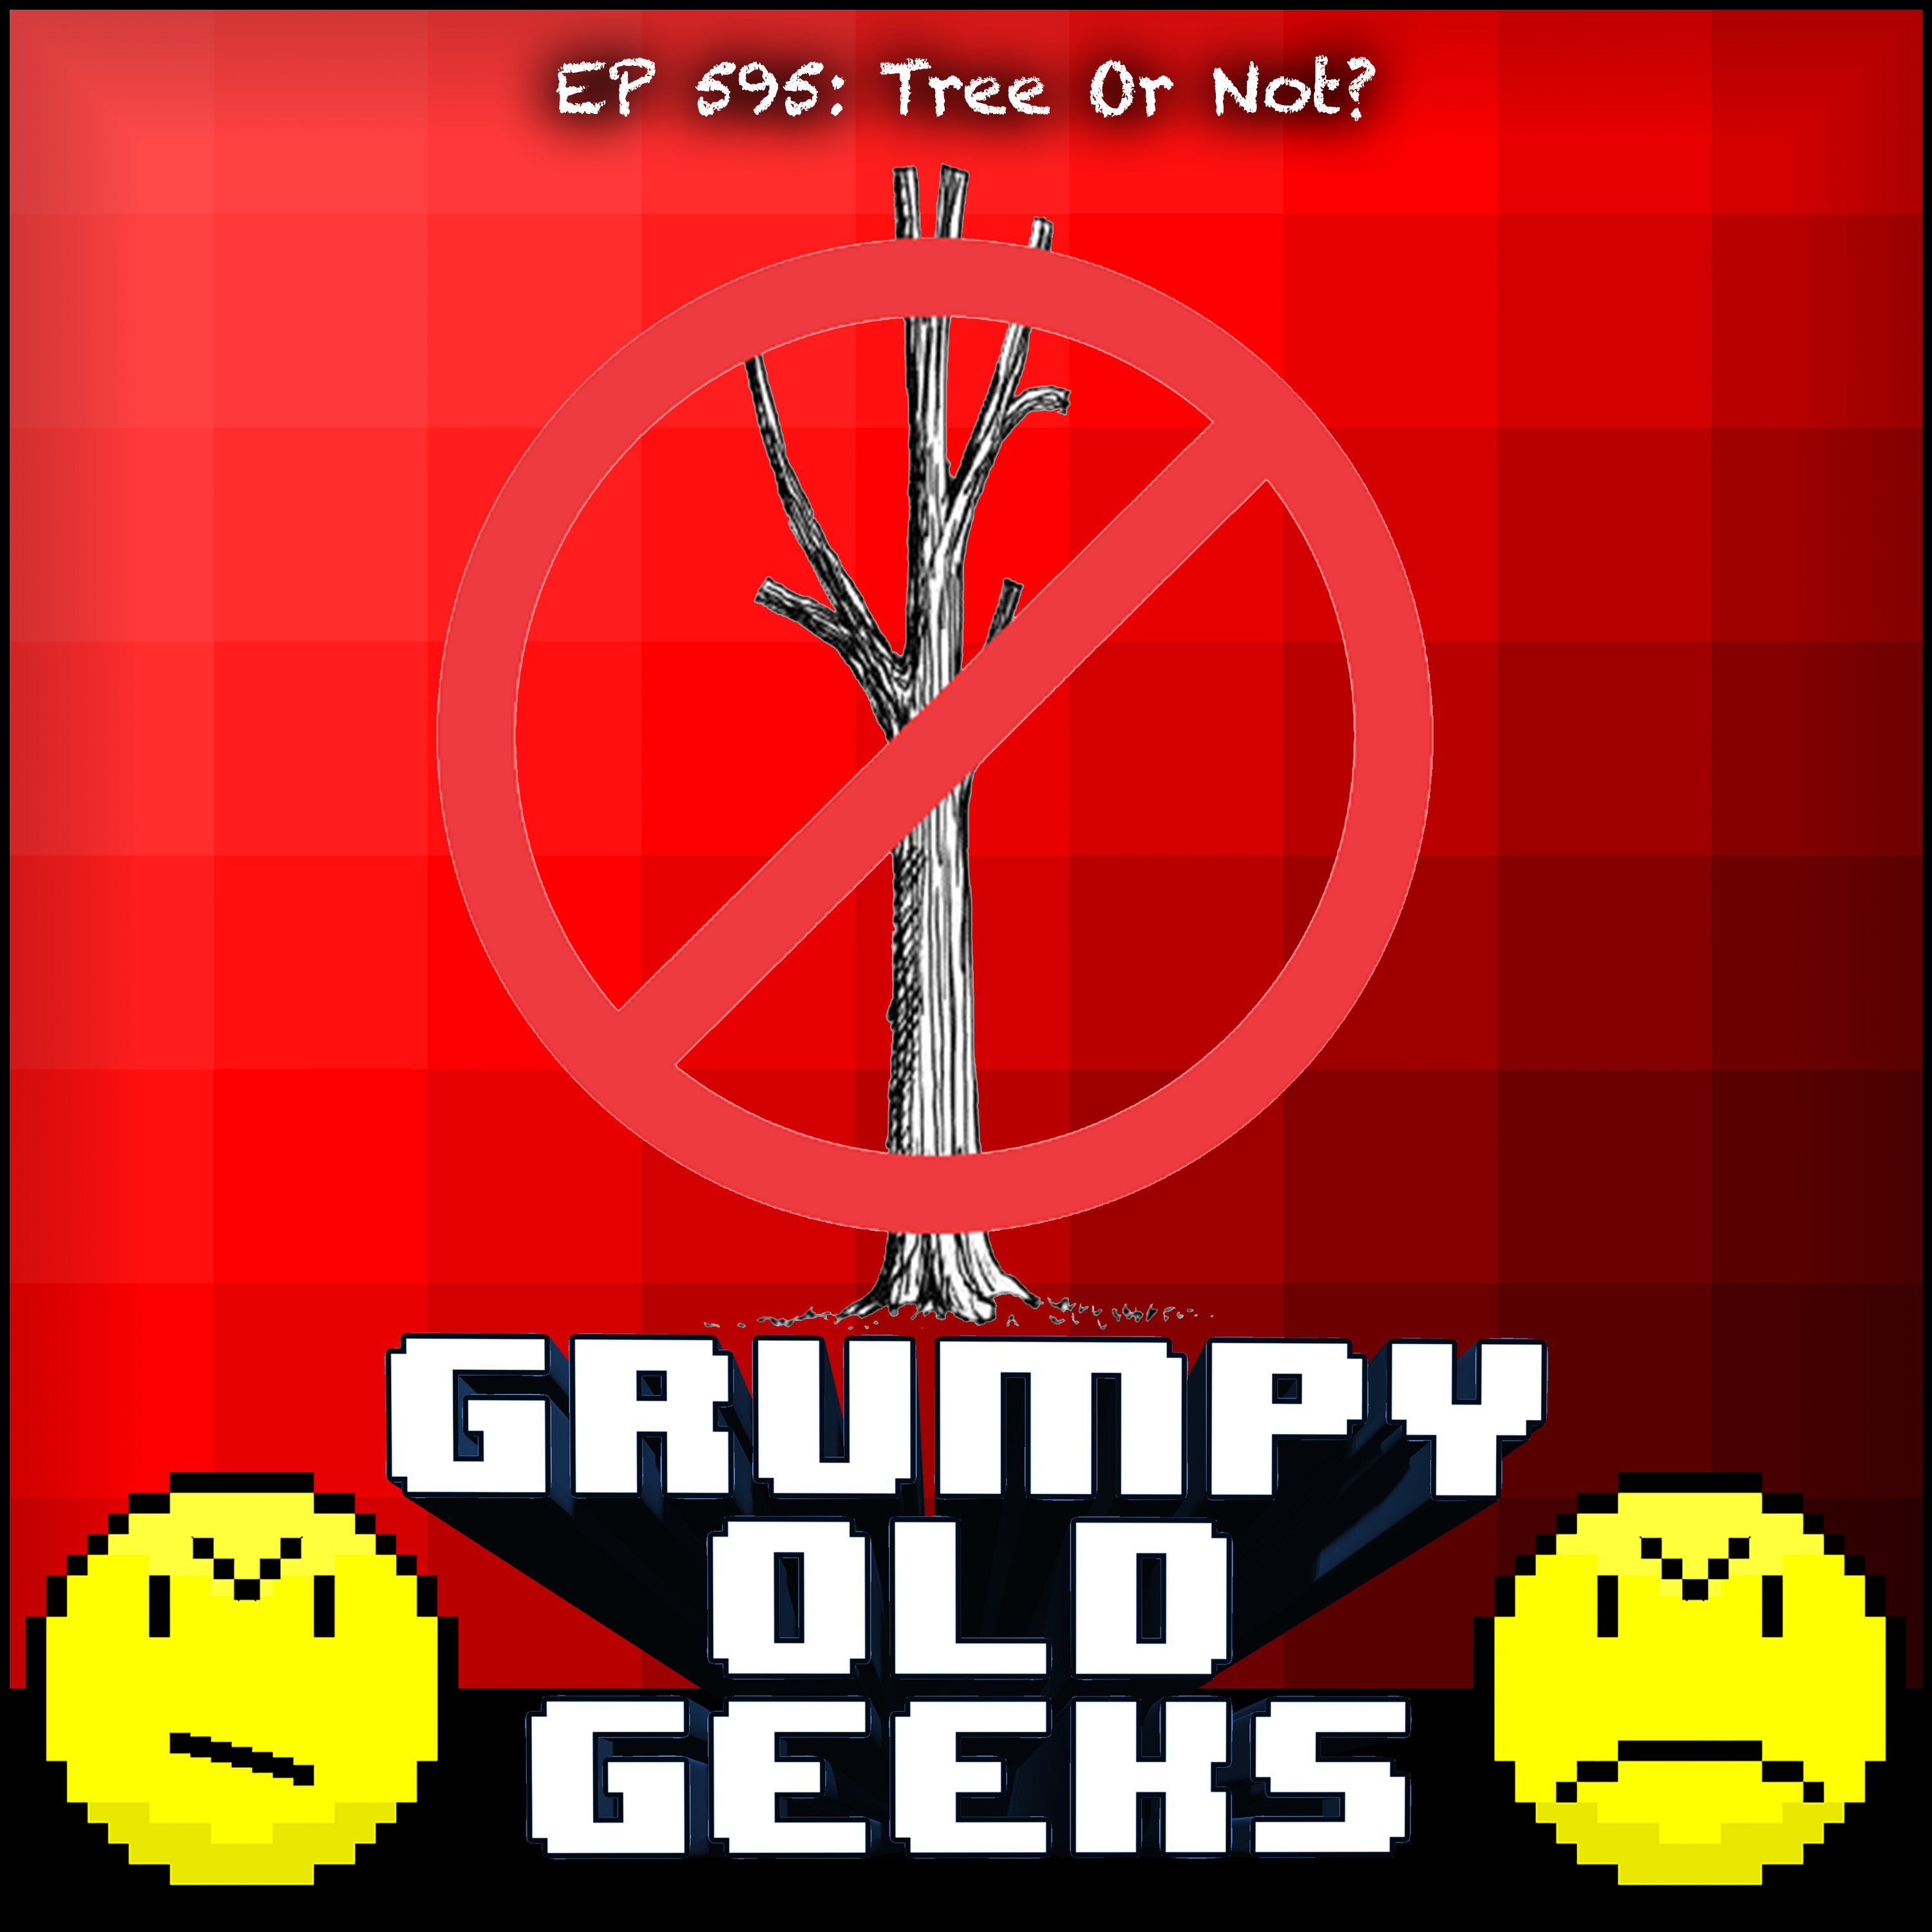 595: Tree Or Not?